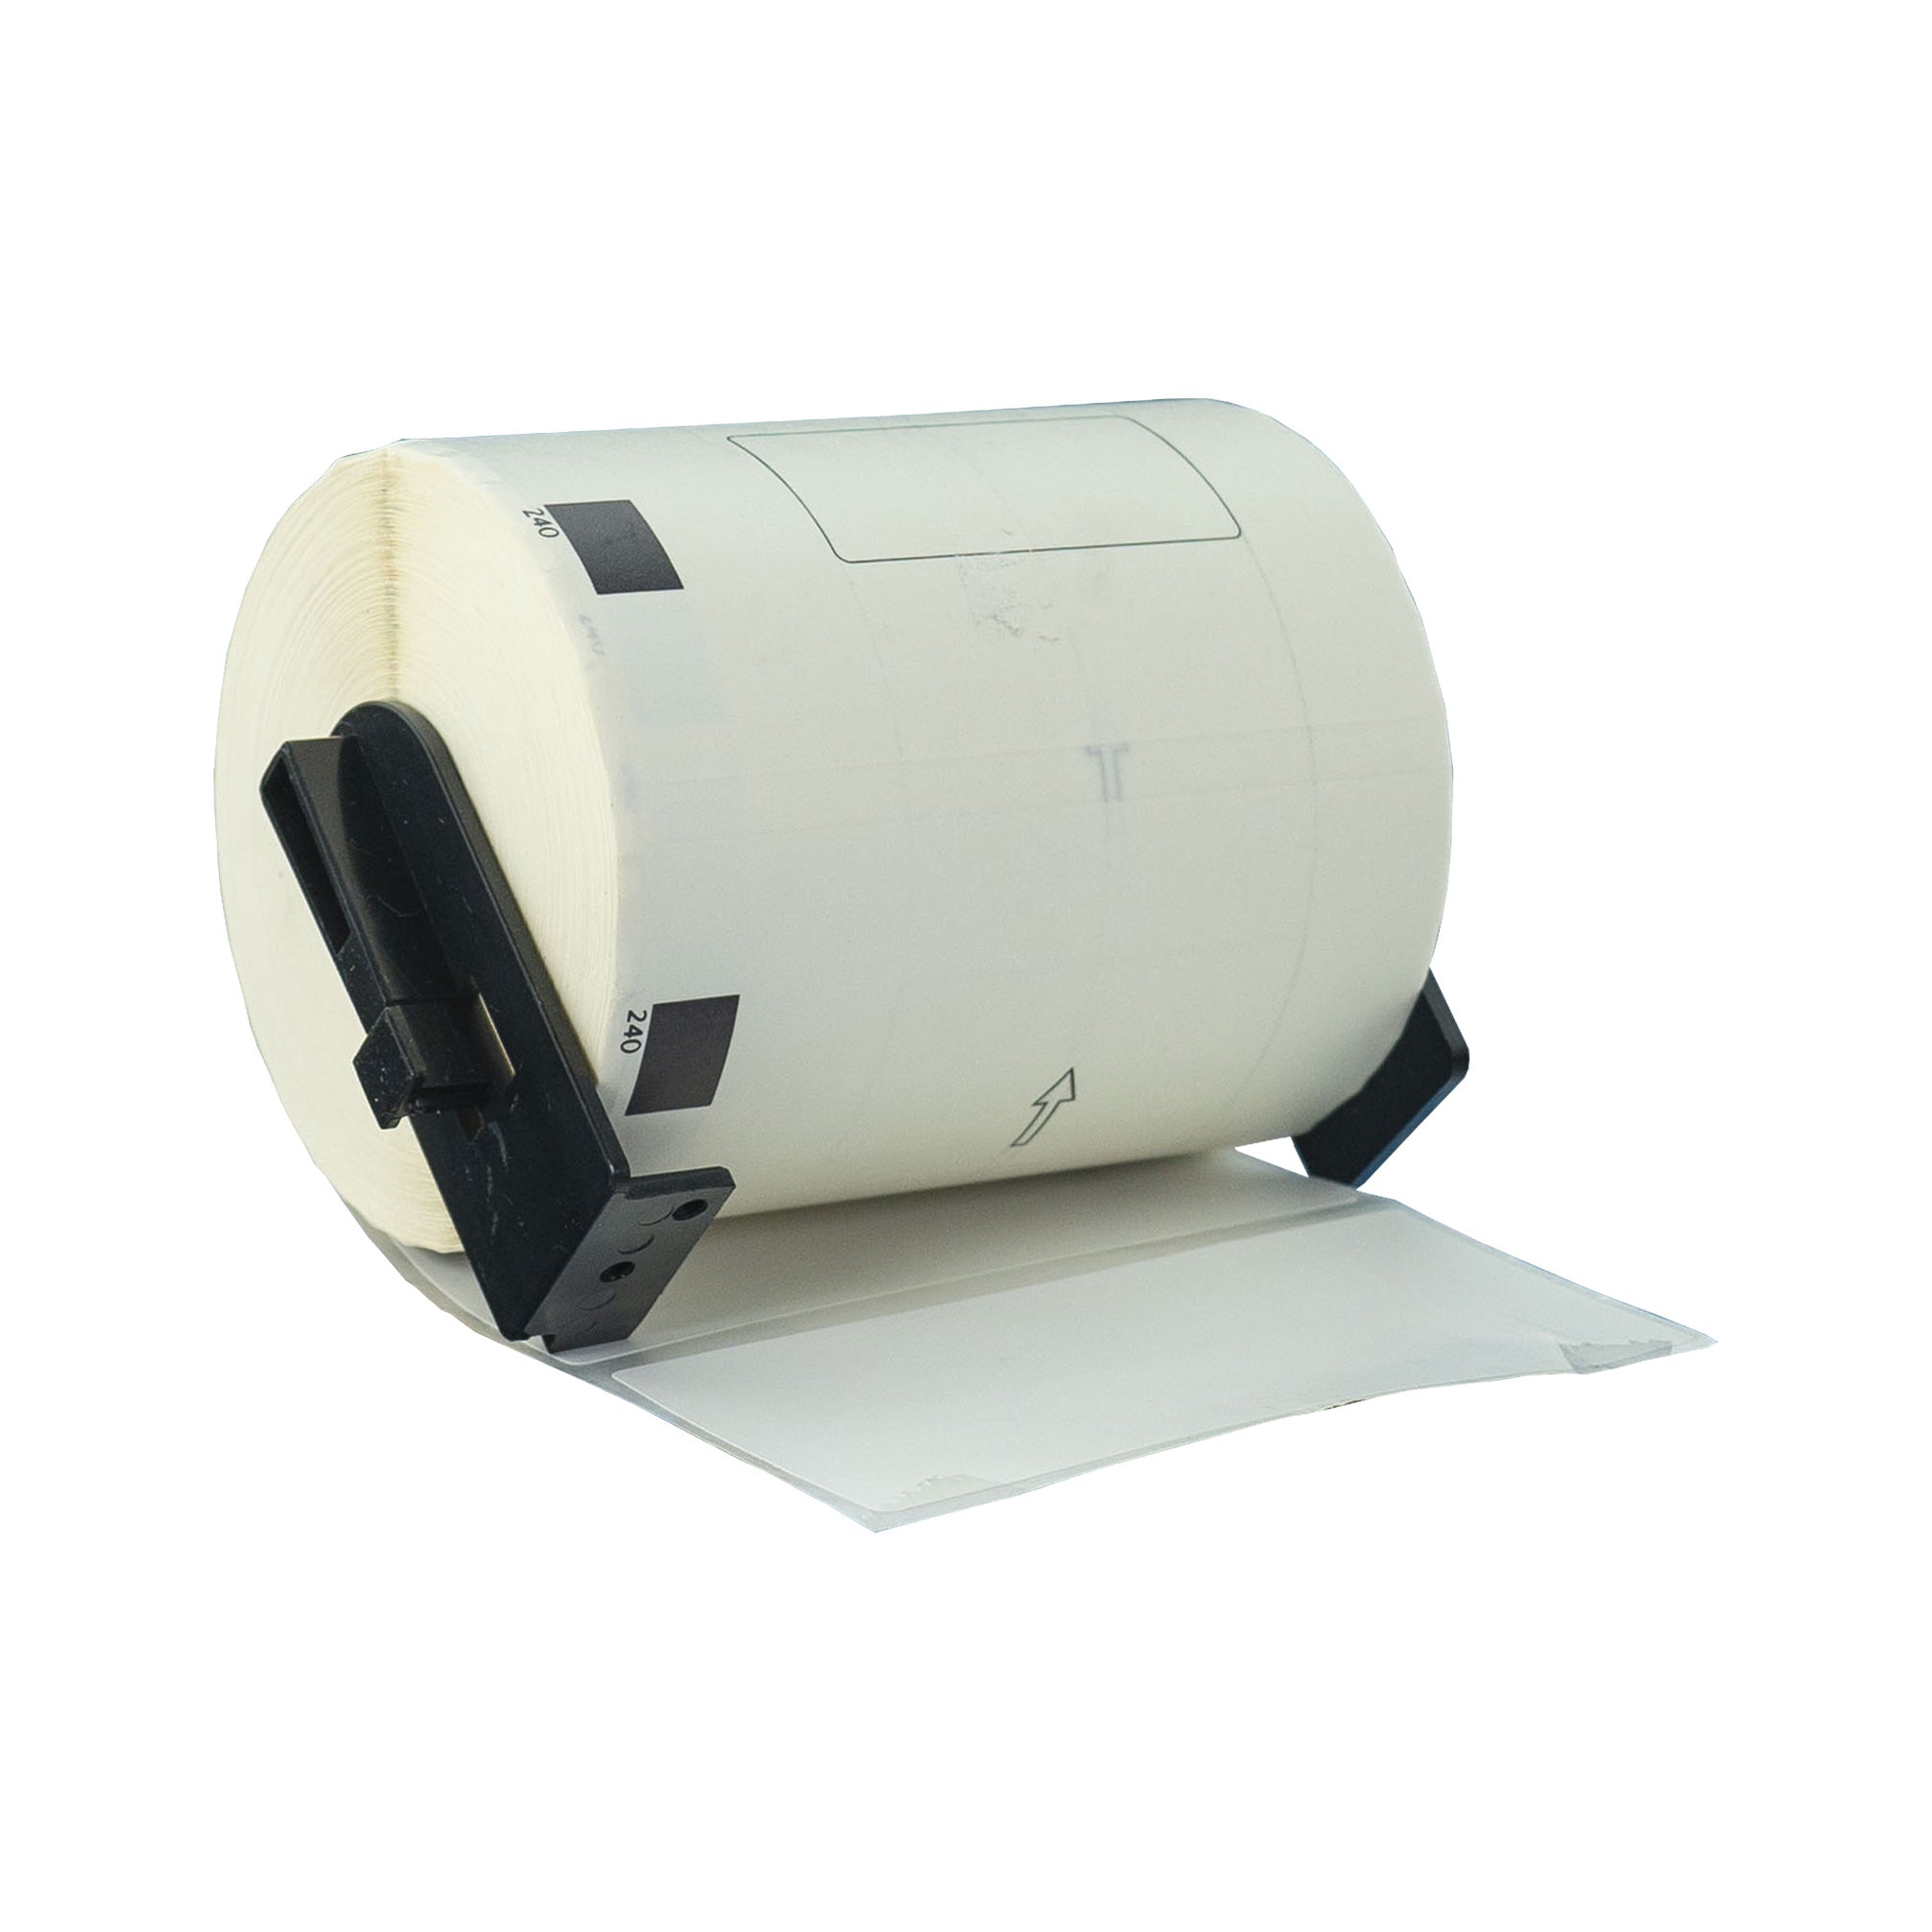 Compatible Brother DK-11240 Labels 102 x 51mm/ 50 Rolls